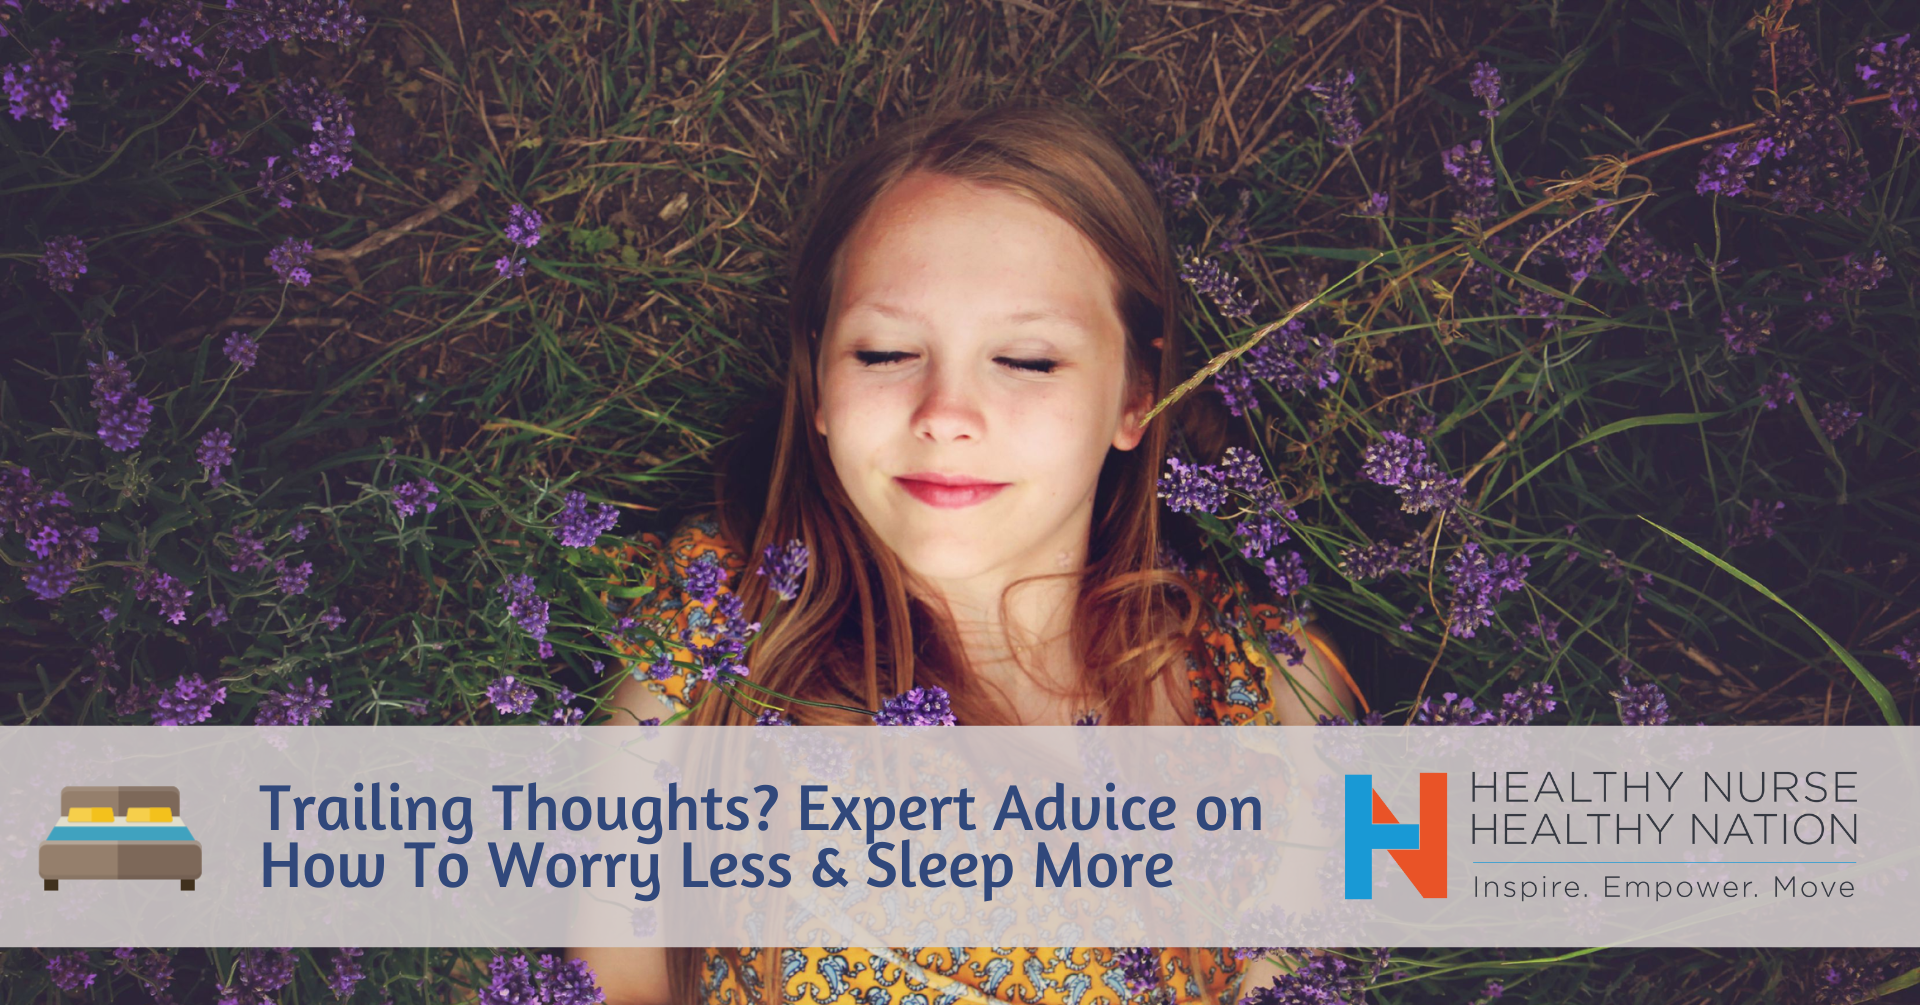 Healthy Nurse, Healthy Nation™ Blog - Trailing Thoughts? Expert Advice On How To Worry Less And Sleep More 4137